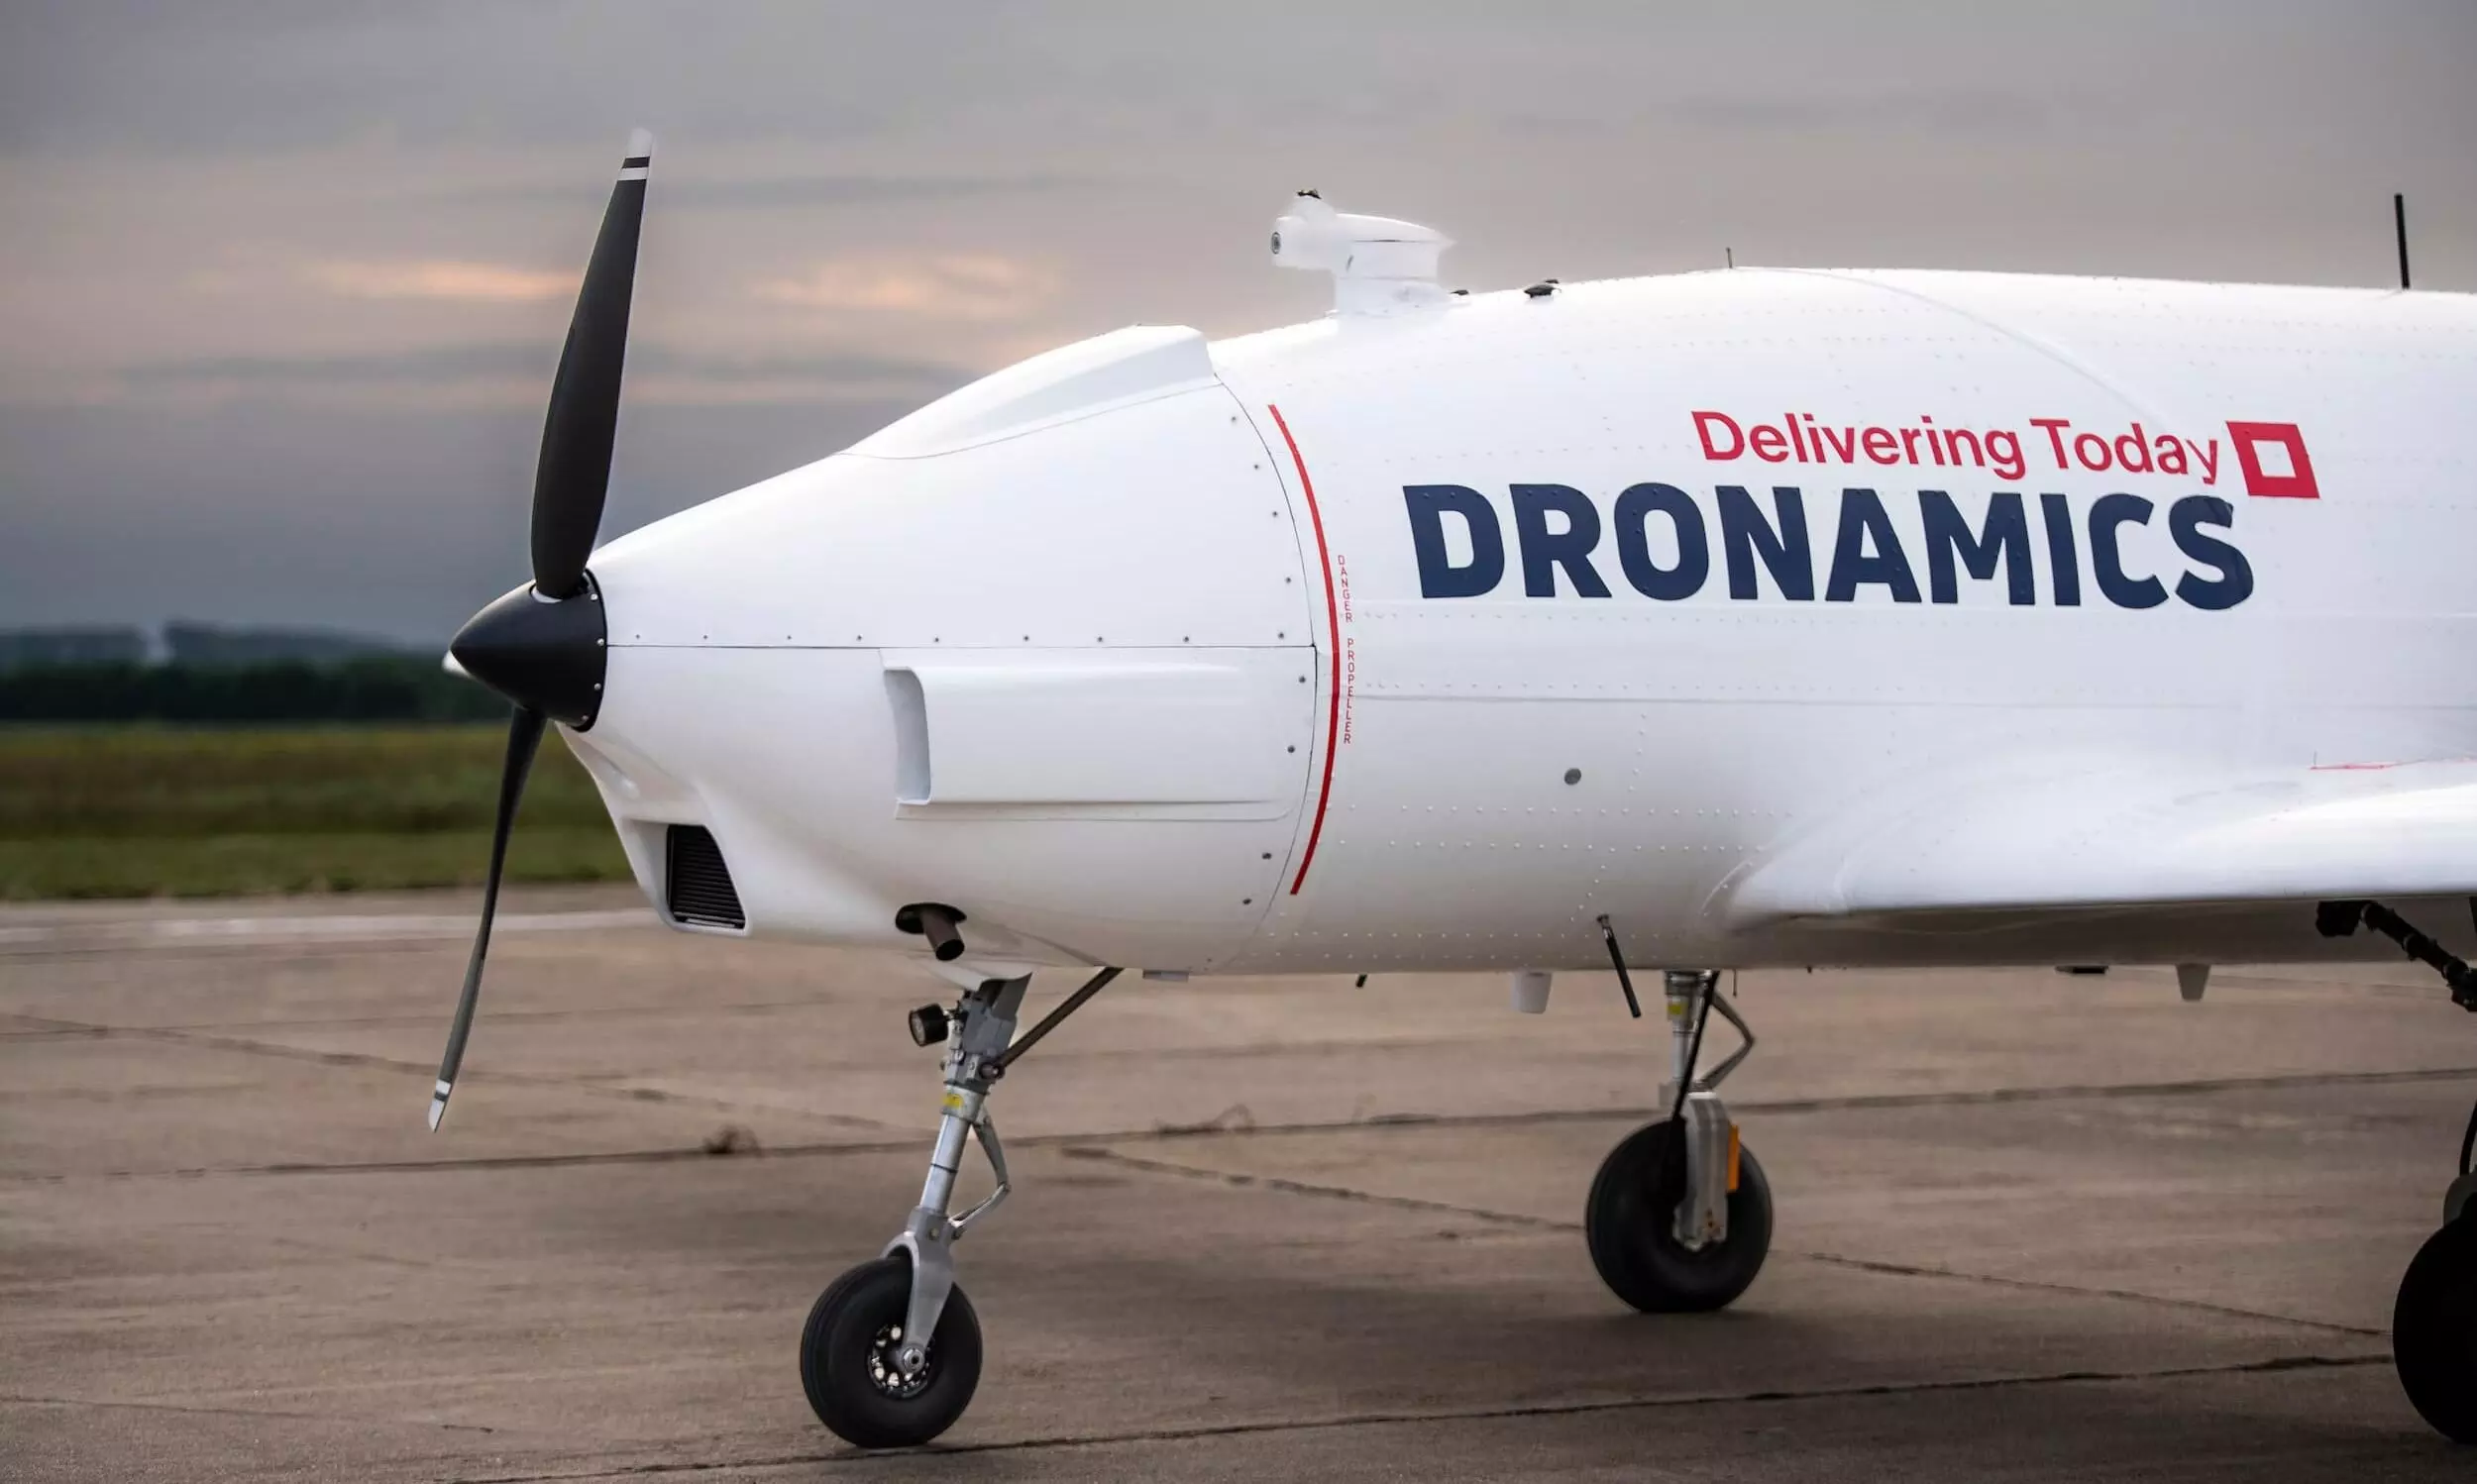 Dronamics, Hellenic Post sign agreement for drone deliveries in Greece